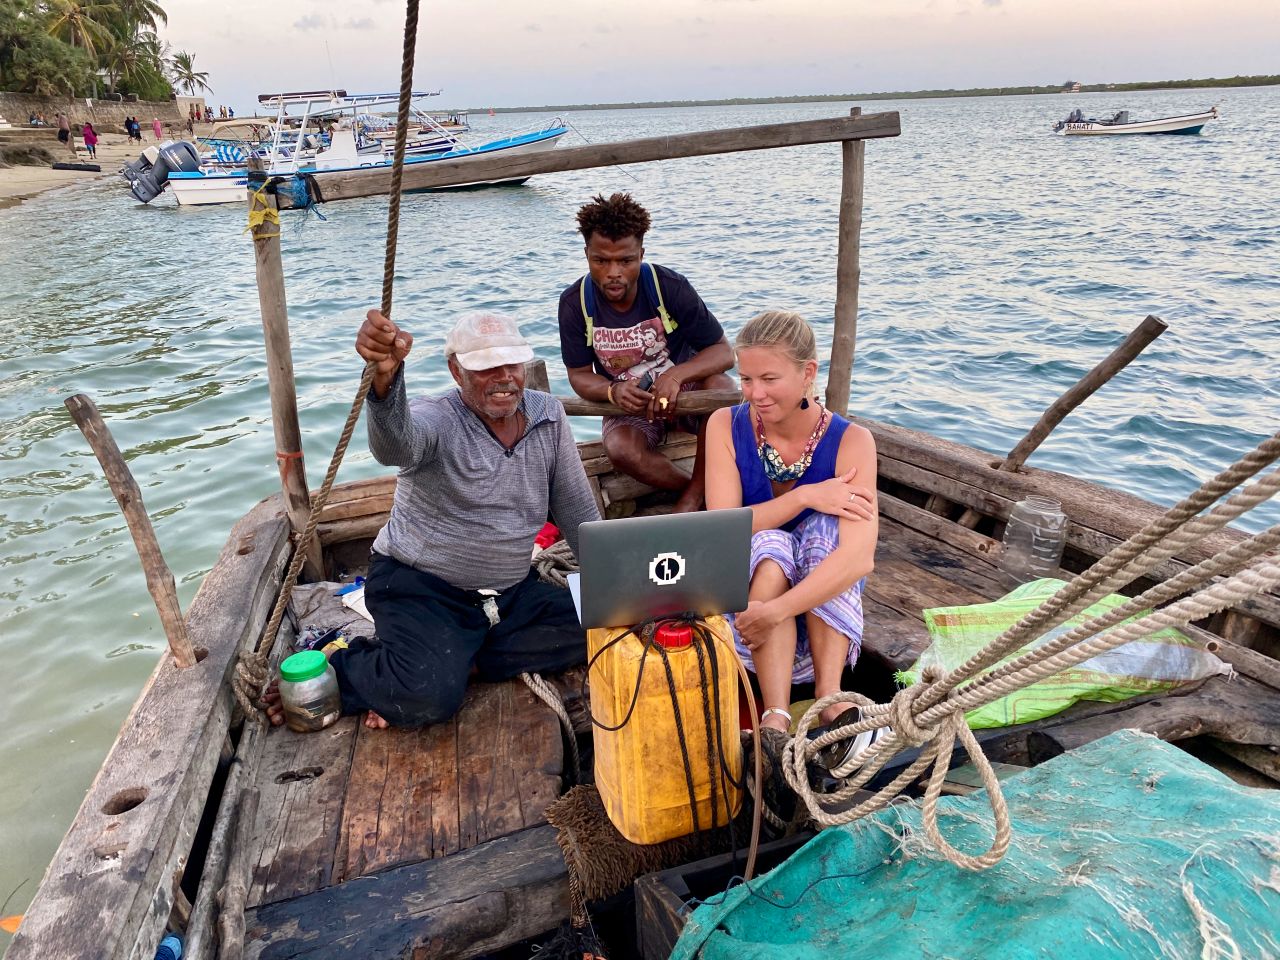 Mzee Hassani, one of the fishermen interviewed for the film, watches it for the first time from his dhow with Elke Bertolli. Having been born and brought up in Lamu, Elke has known the fishermen her whole life, and Hassani was a great friend of her father's. 